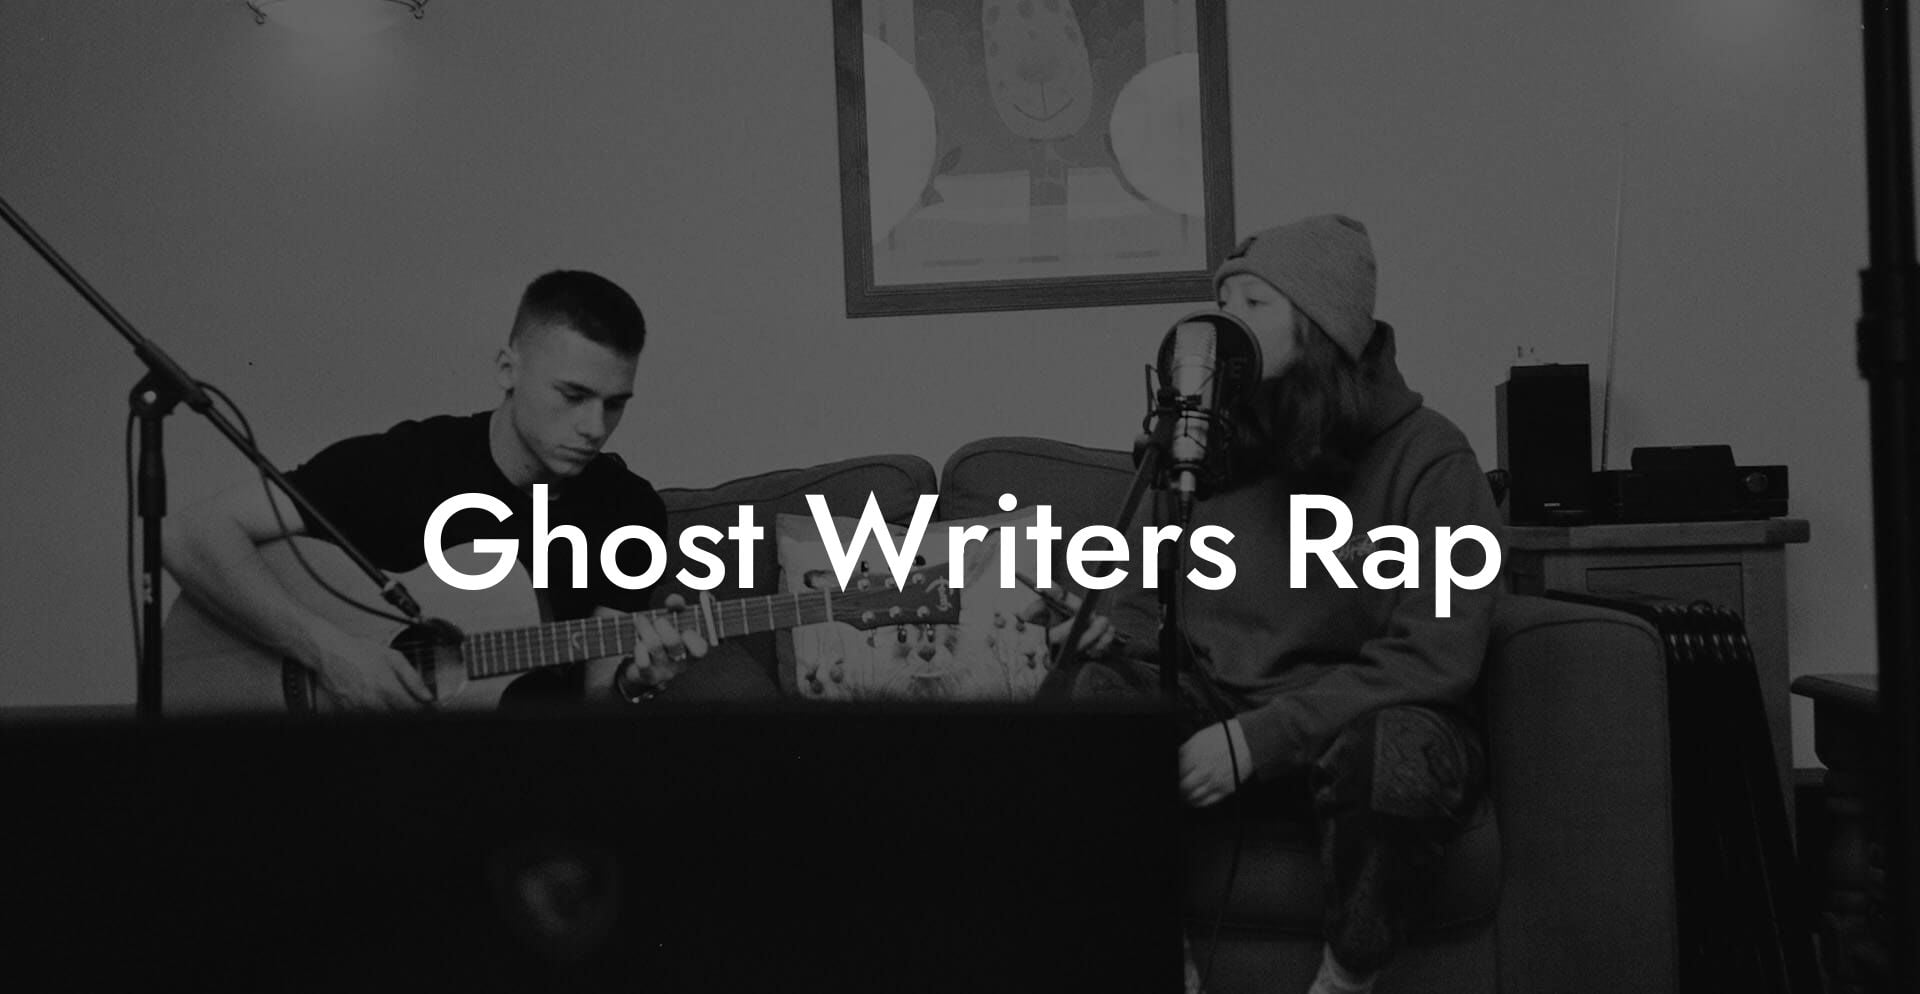 ghost writers rap lyric assistant